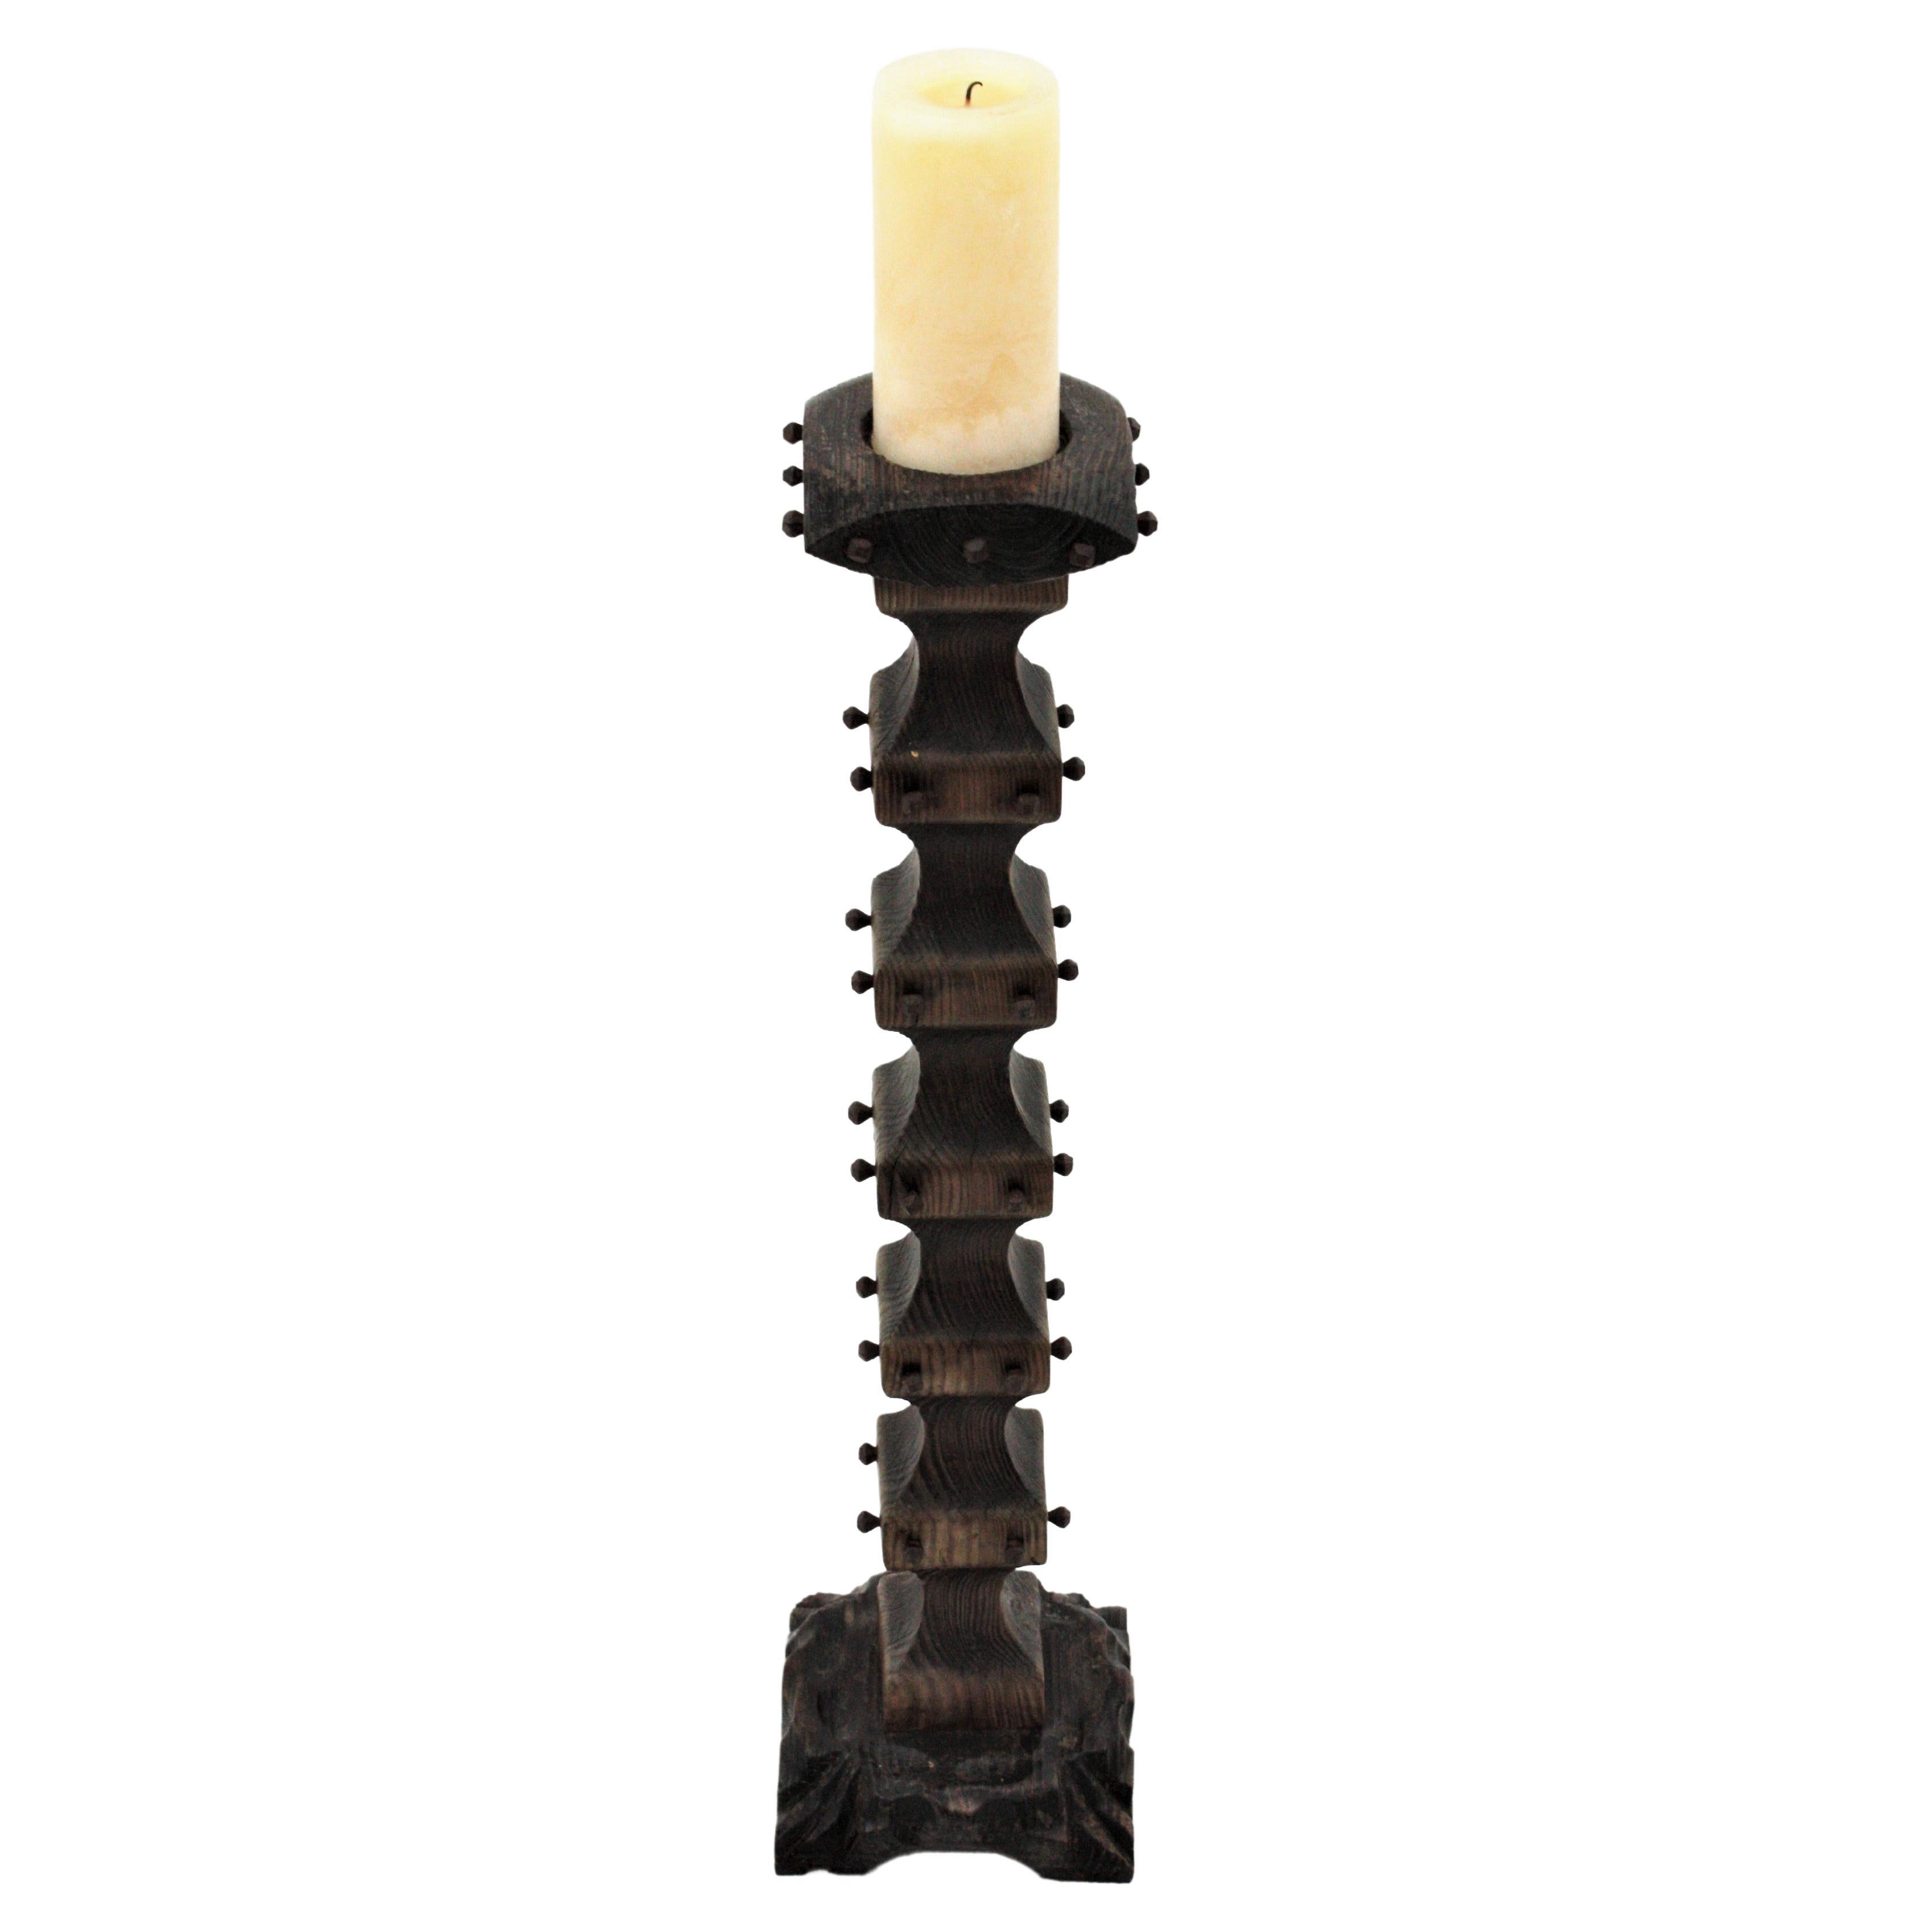 Spanish Revival Carved Wood Torchere Floor Candle Holder with Nail Detail